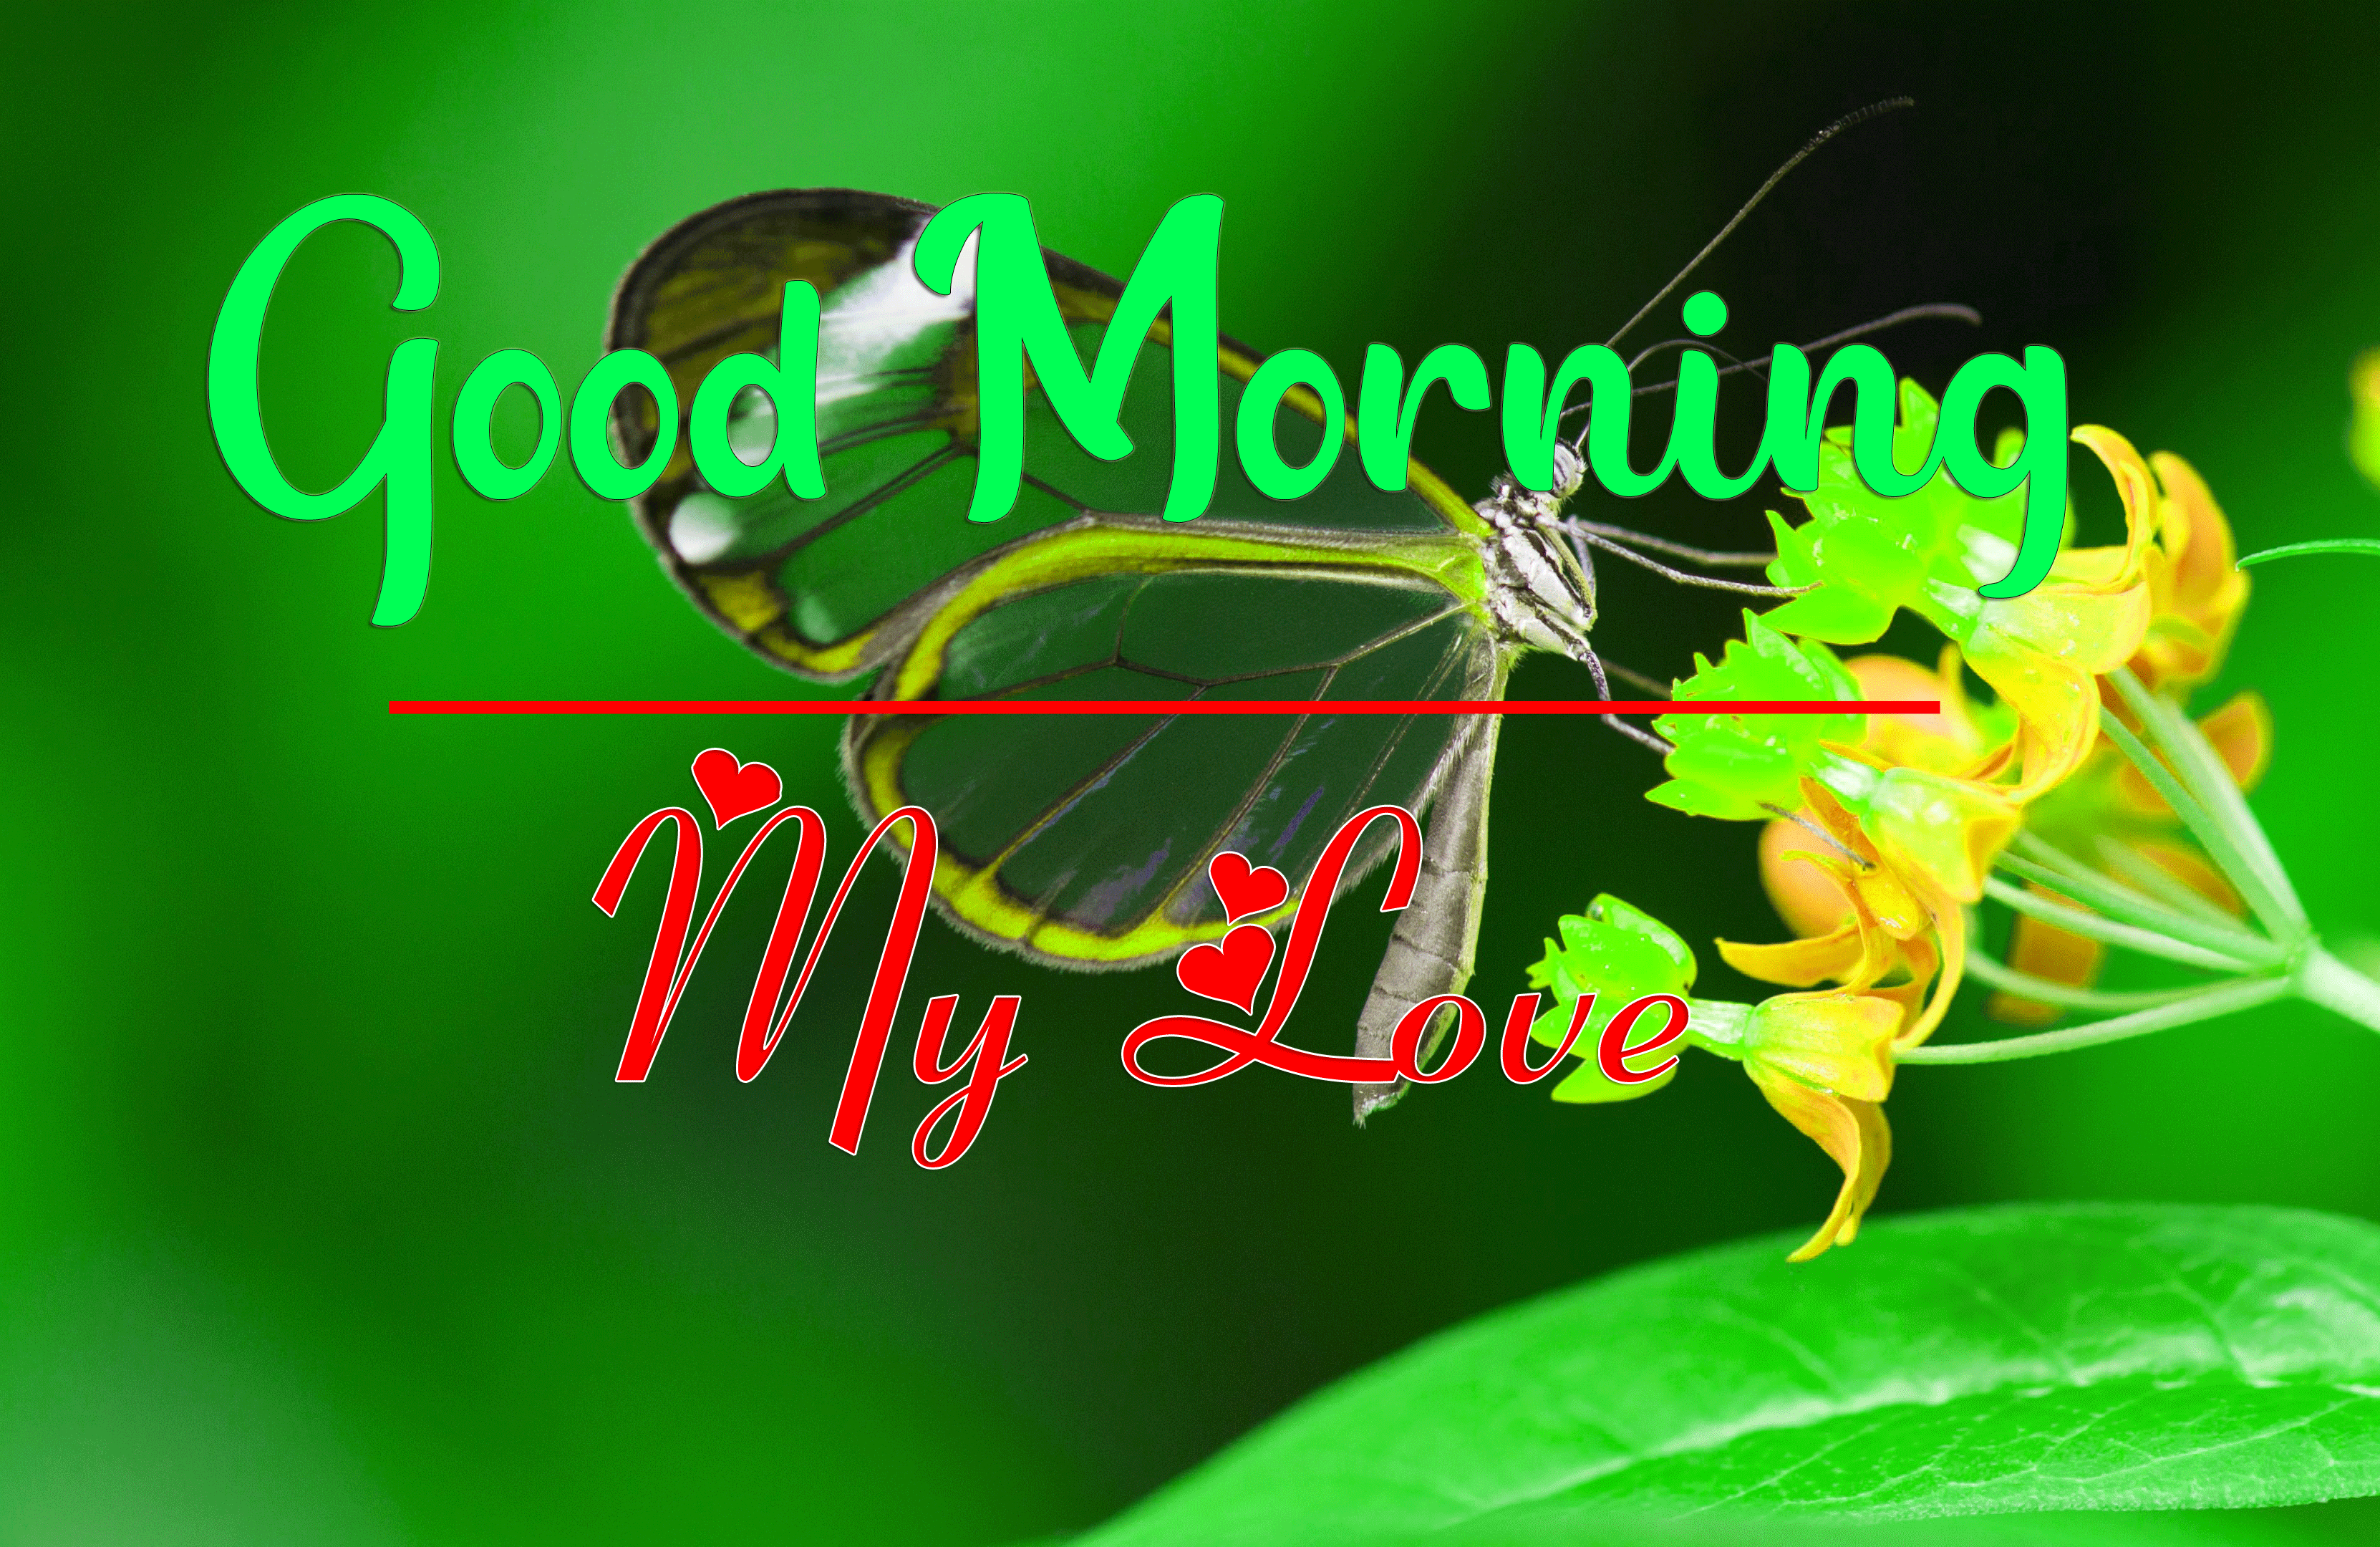 Good Morning Wishes Images HD 1080p 27